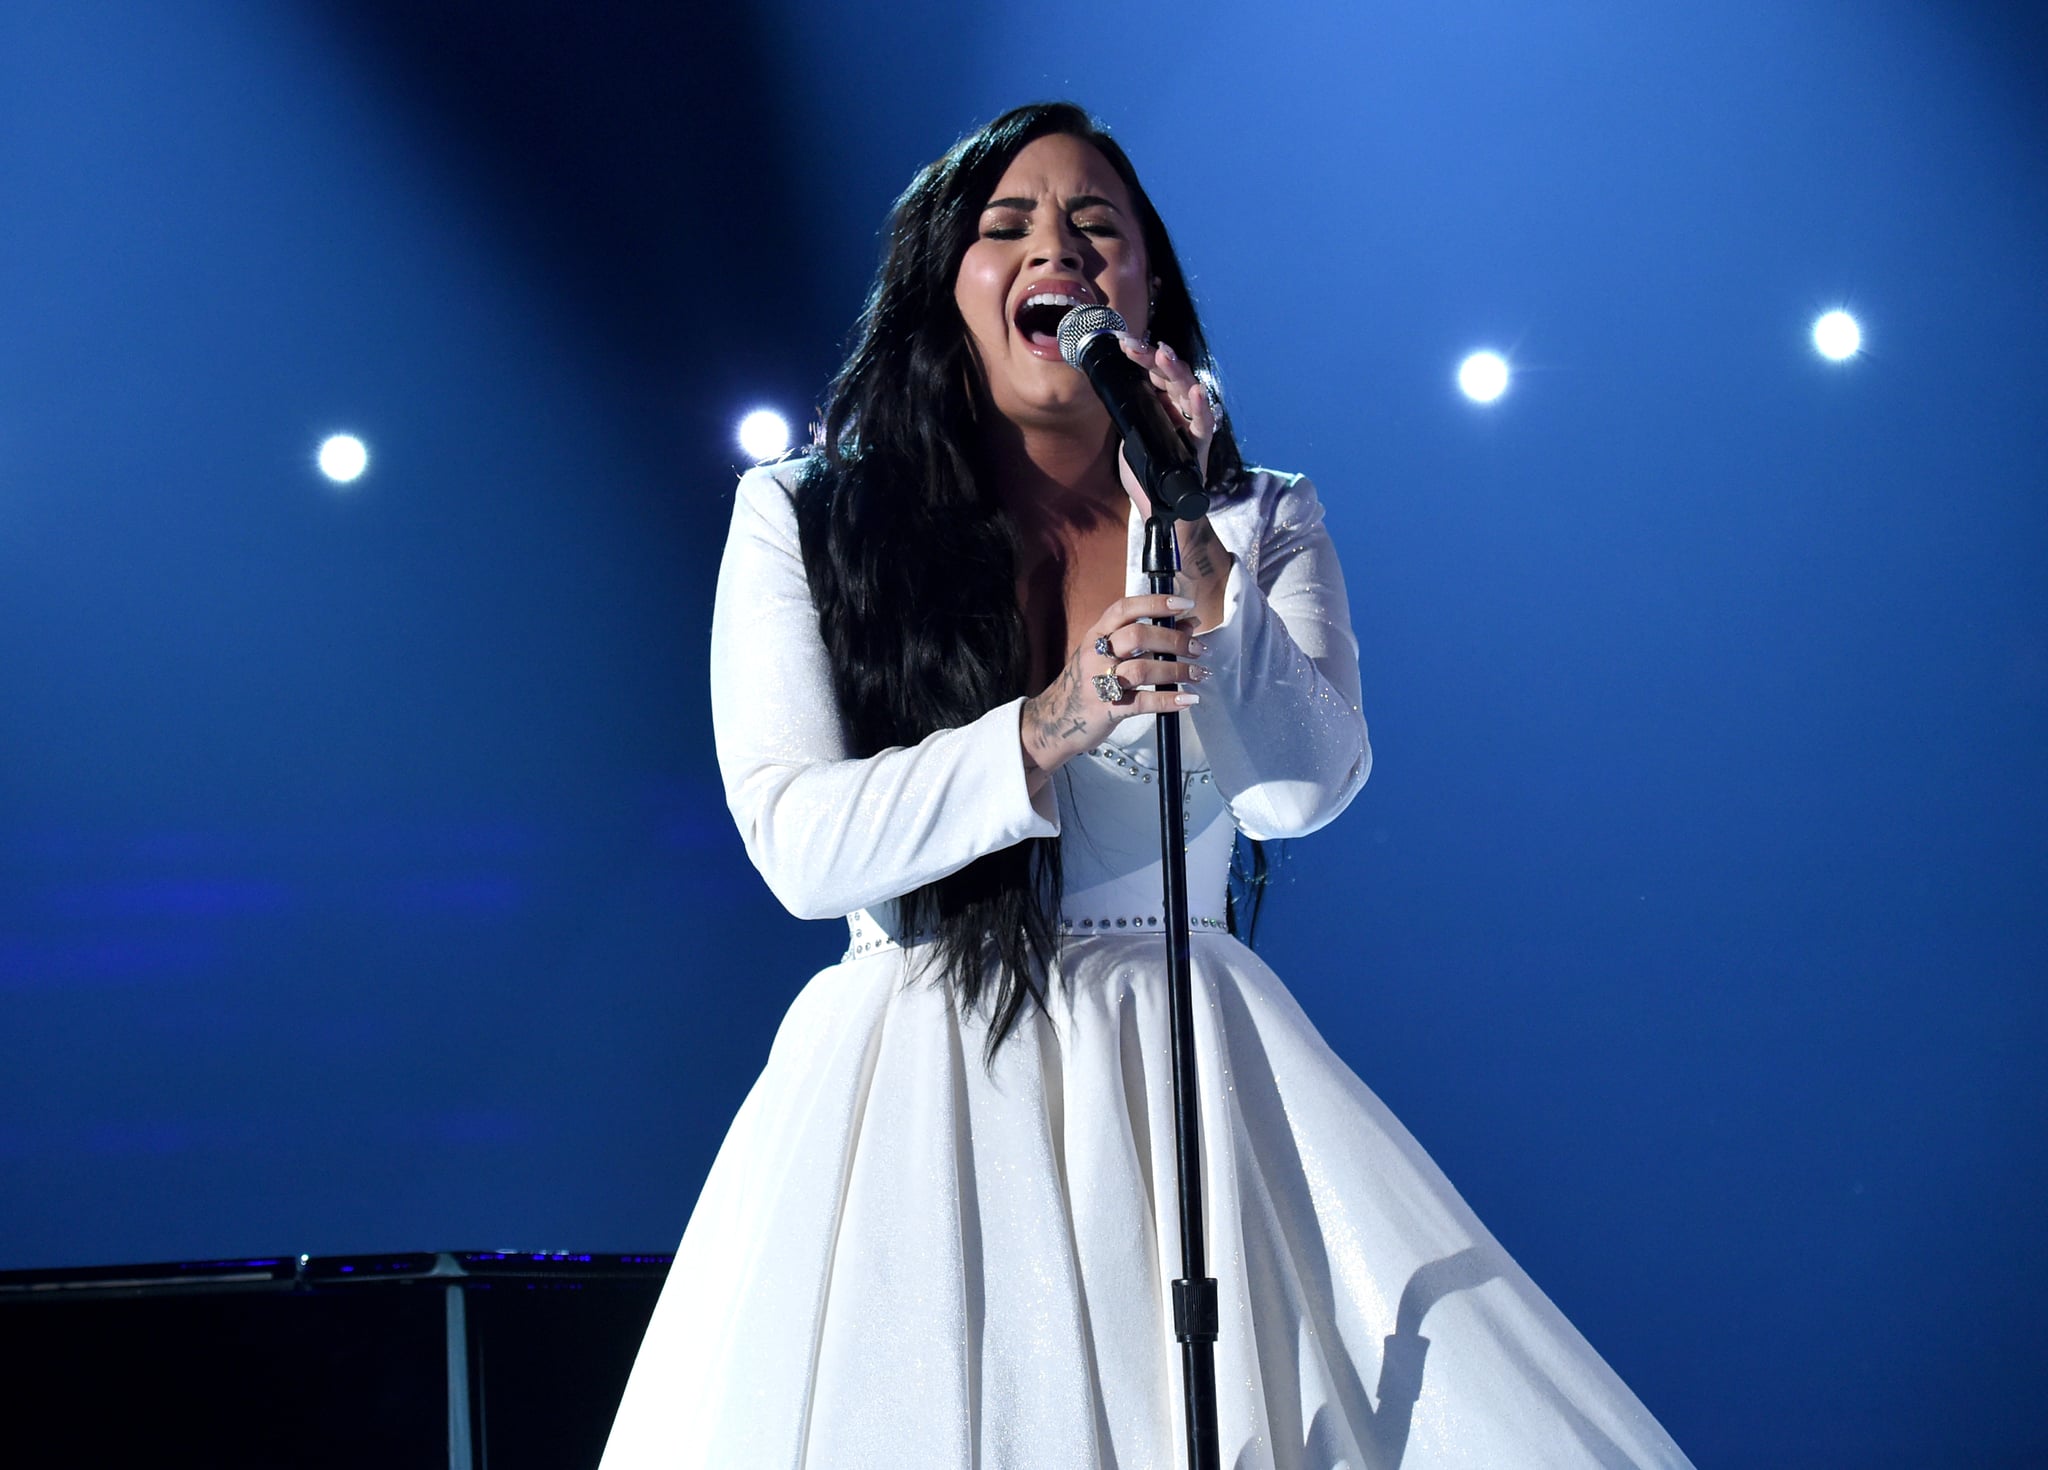 LOS ANGELES, CALIFORNIA - JANUARY 26: Demi Lovato performs at the 62nd Annual GRAMMY Awards on January 26, 2020 in Los Angeles, California. (Photo by John Shearer/Getty Images for The Recording Academy)